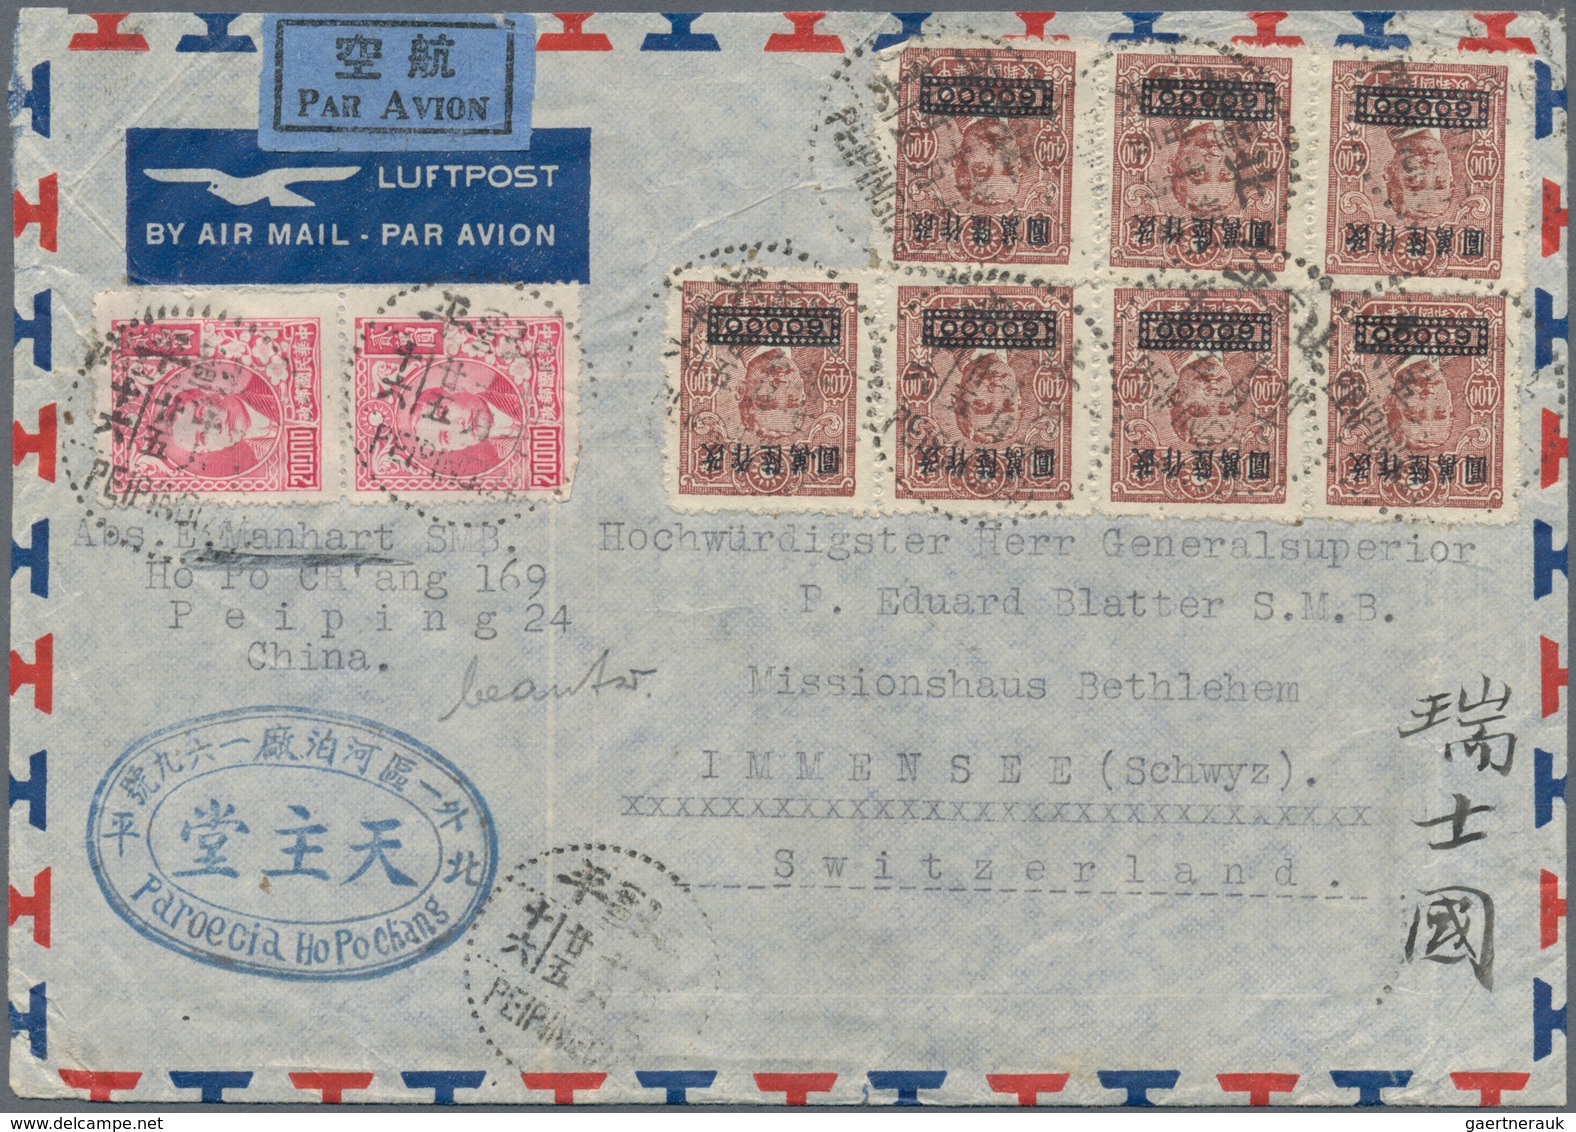 China: 1947/48, Air Mail Covers (4) To Switzerland (3) Or USA, Including 1947 Postal Service Set (5, - 1912-1949 République